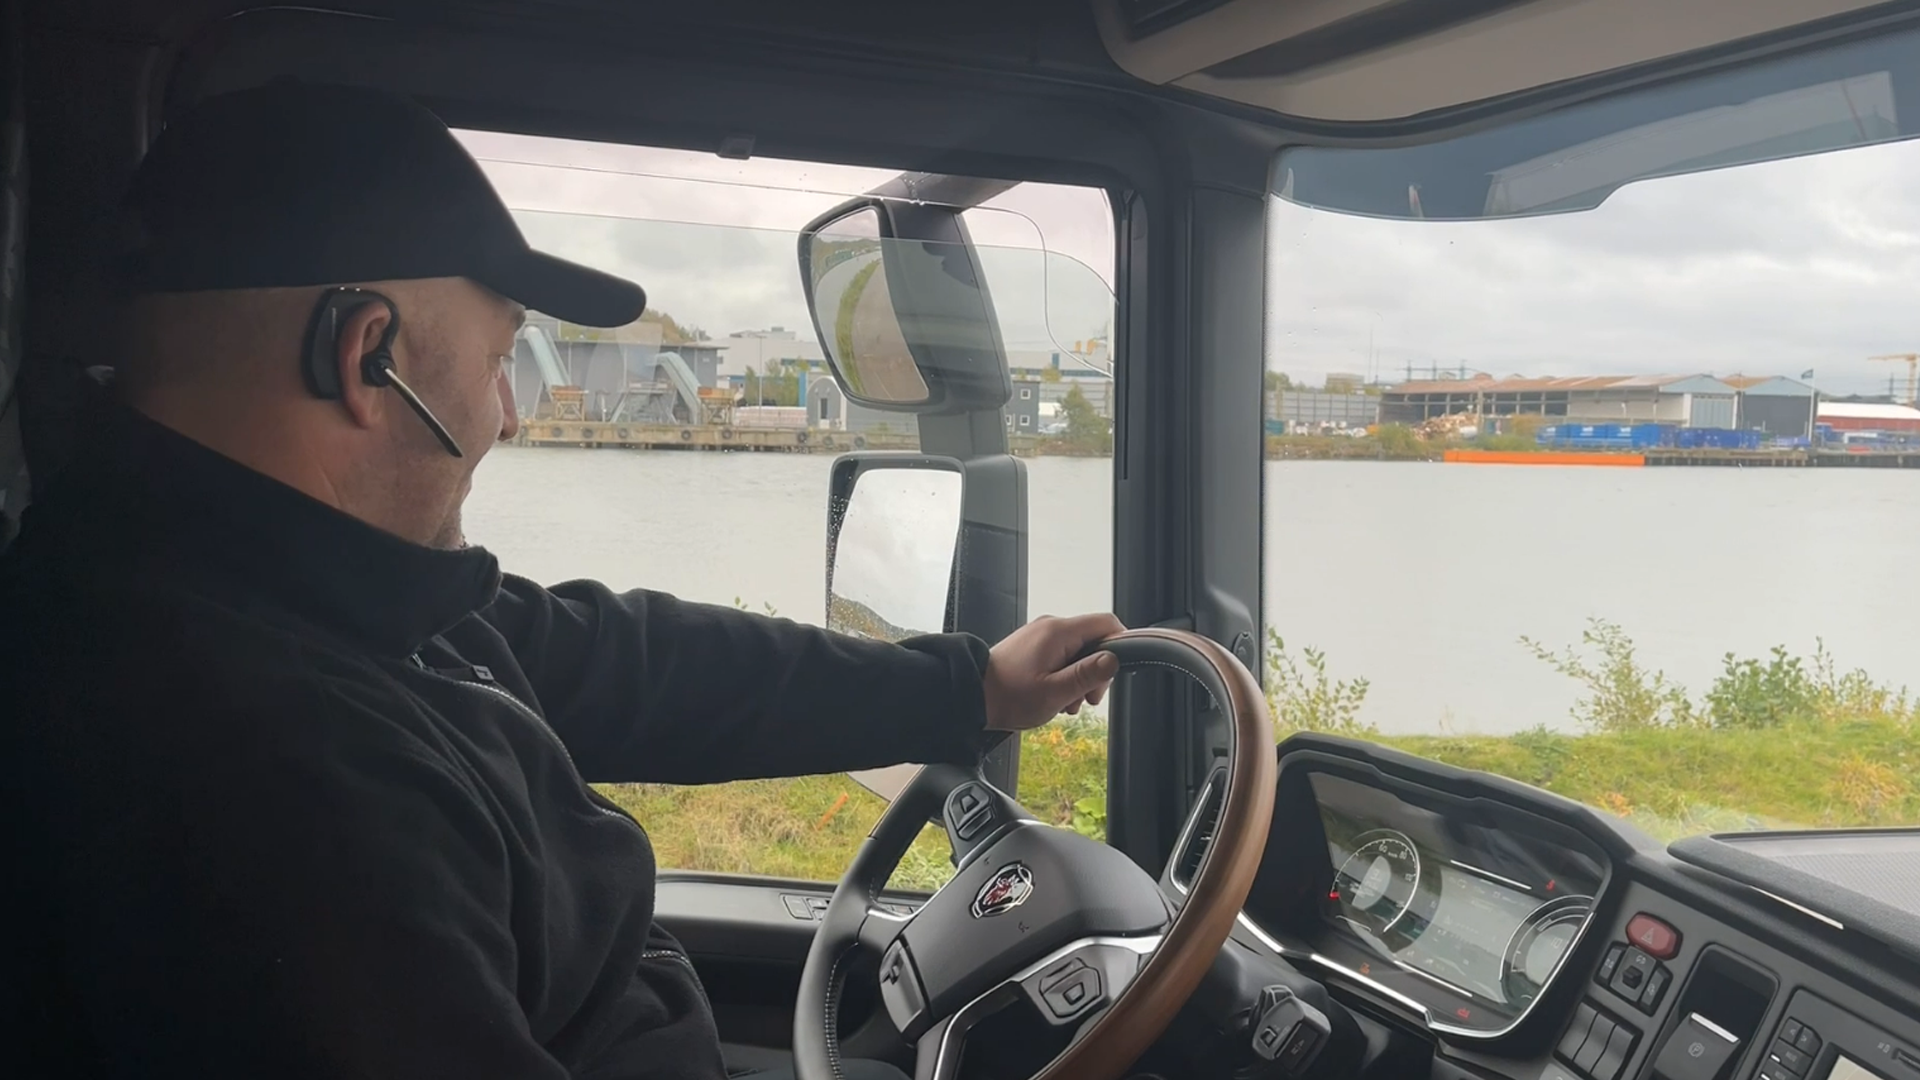 How can truck drivers’ work environment be easily improved?